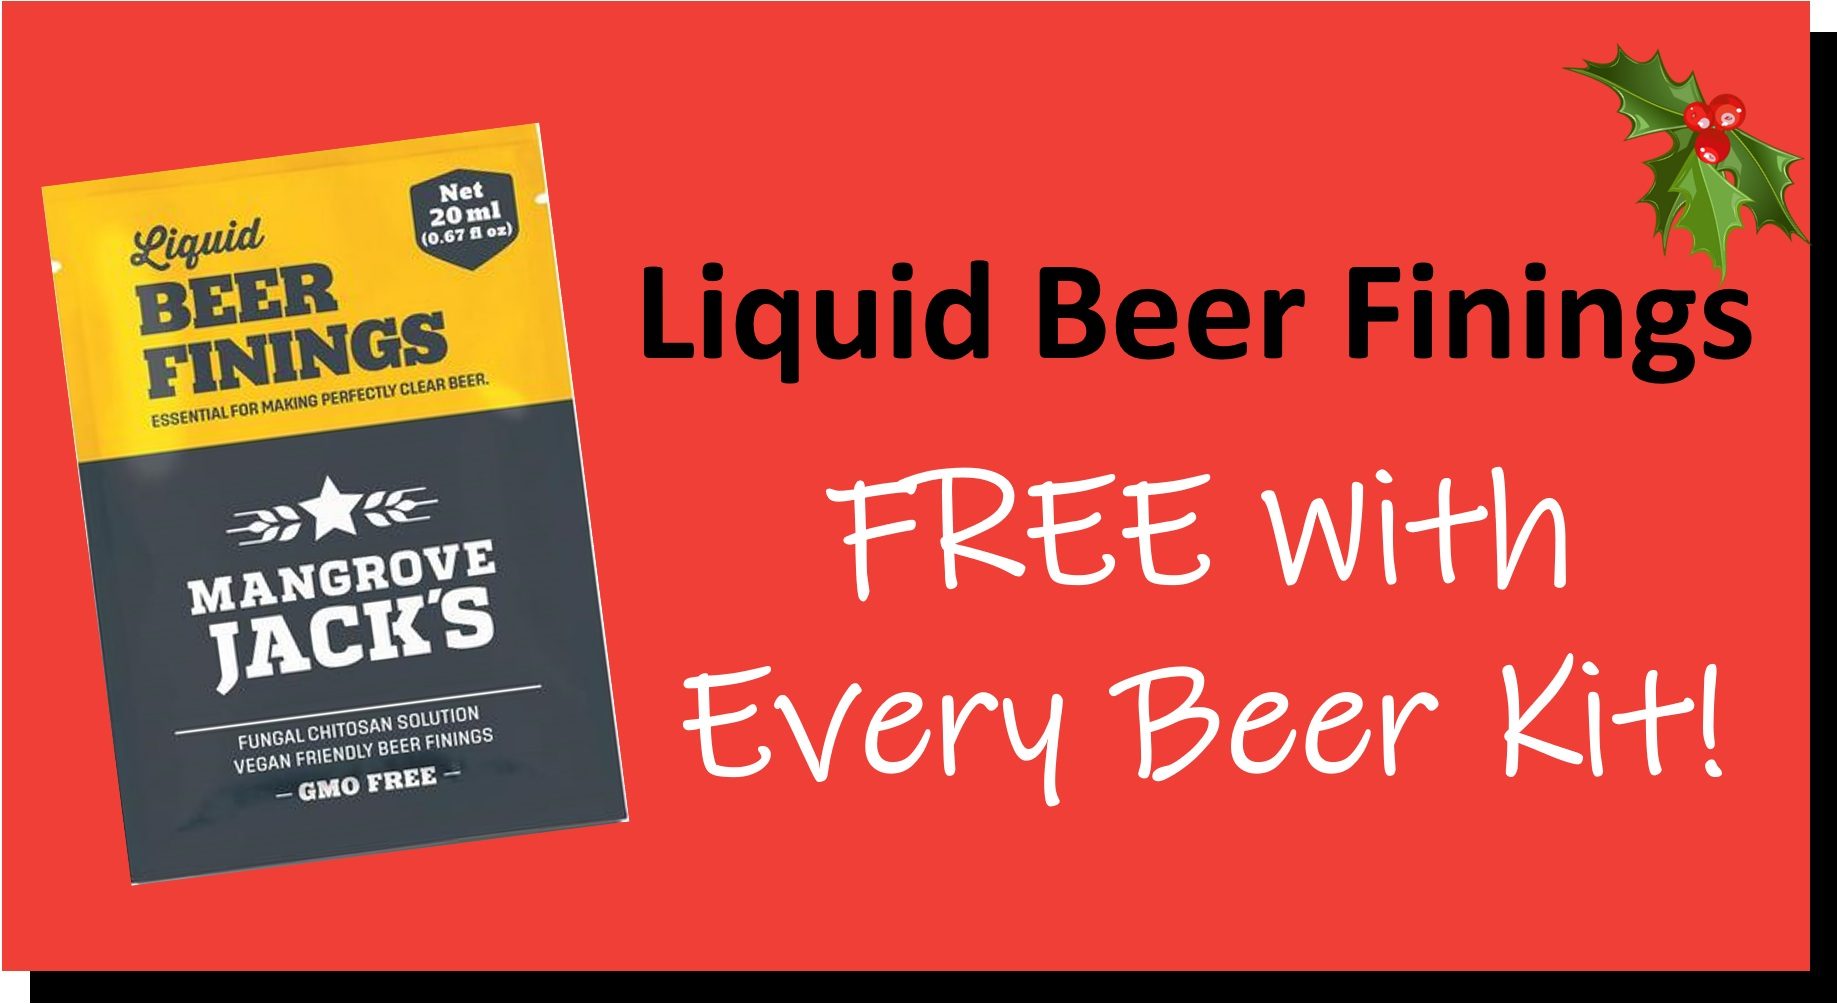 Free Finings With Beer Kit - Home Brew Gift Special Offer